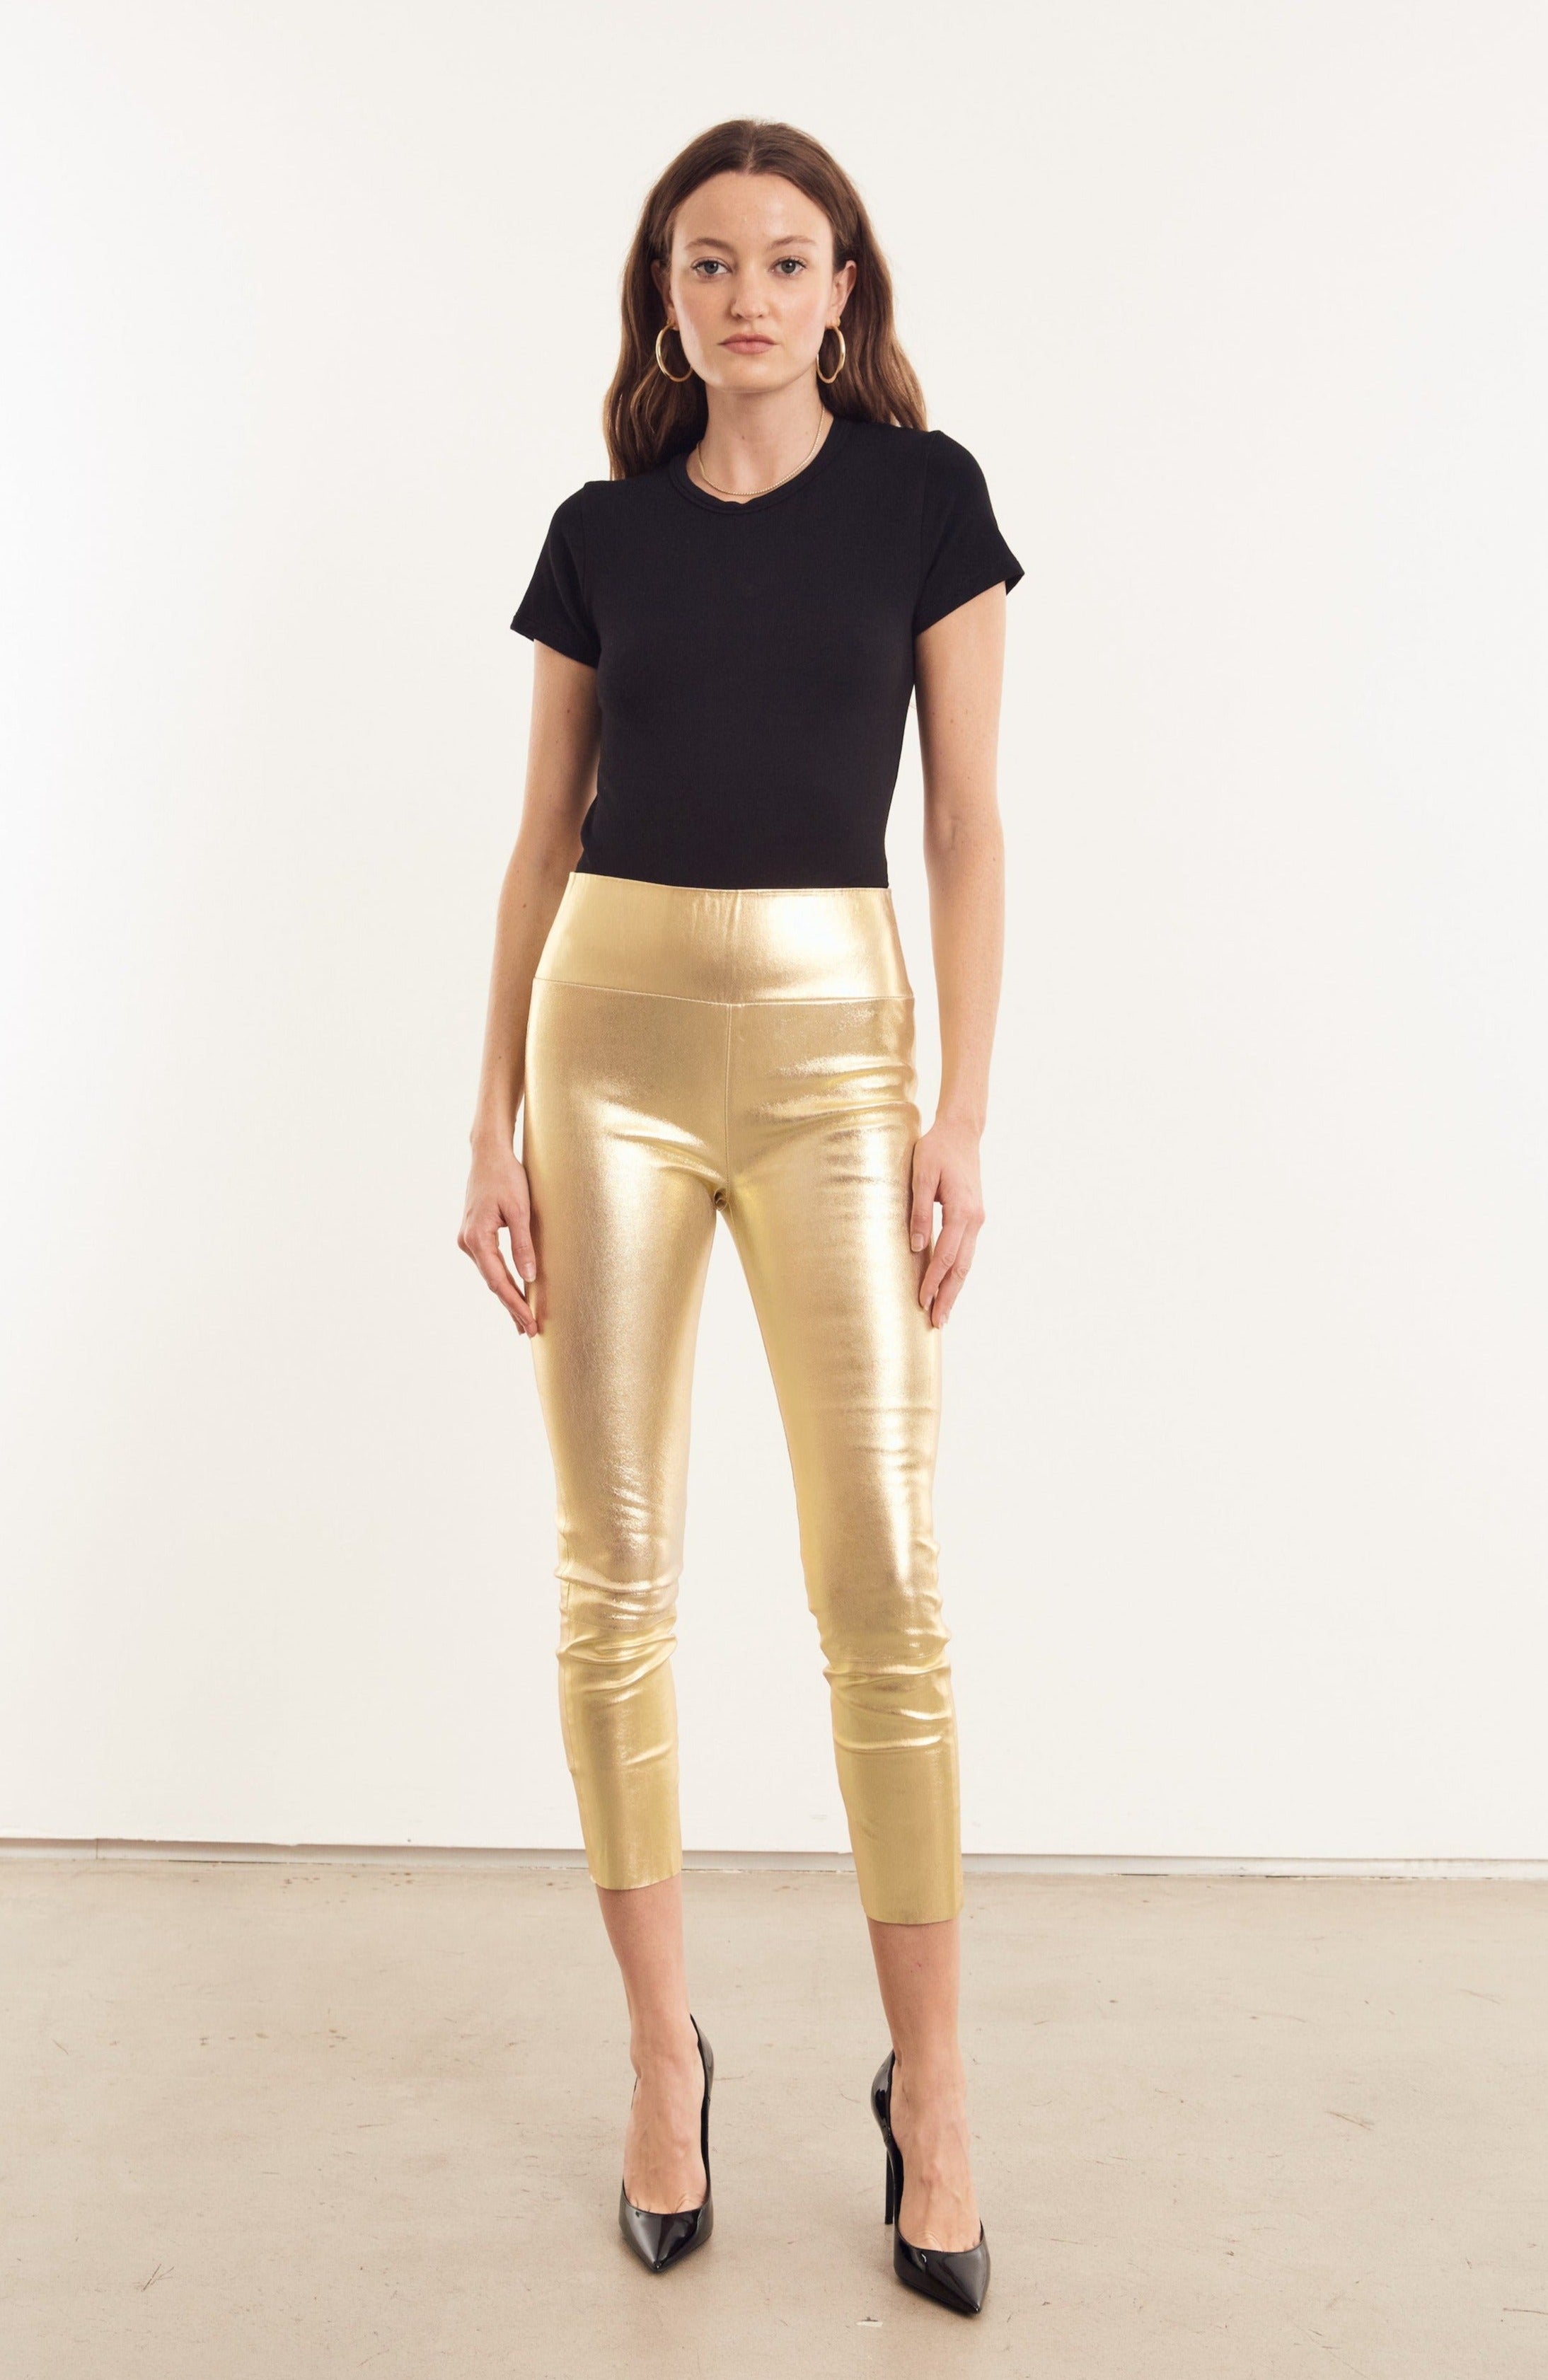 Leggings Effect - Leather Shiny Trousers Laminated Metal Gold